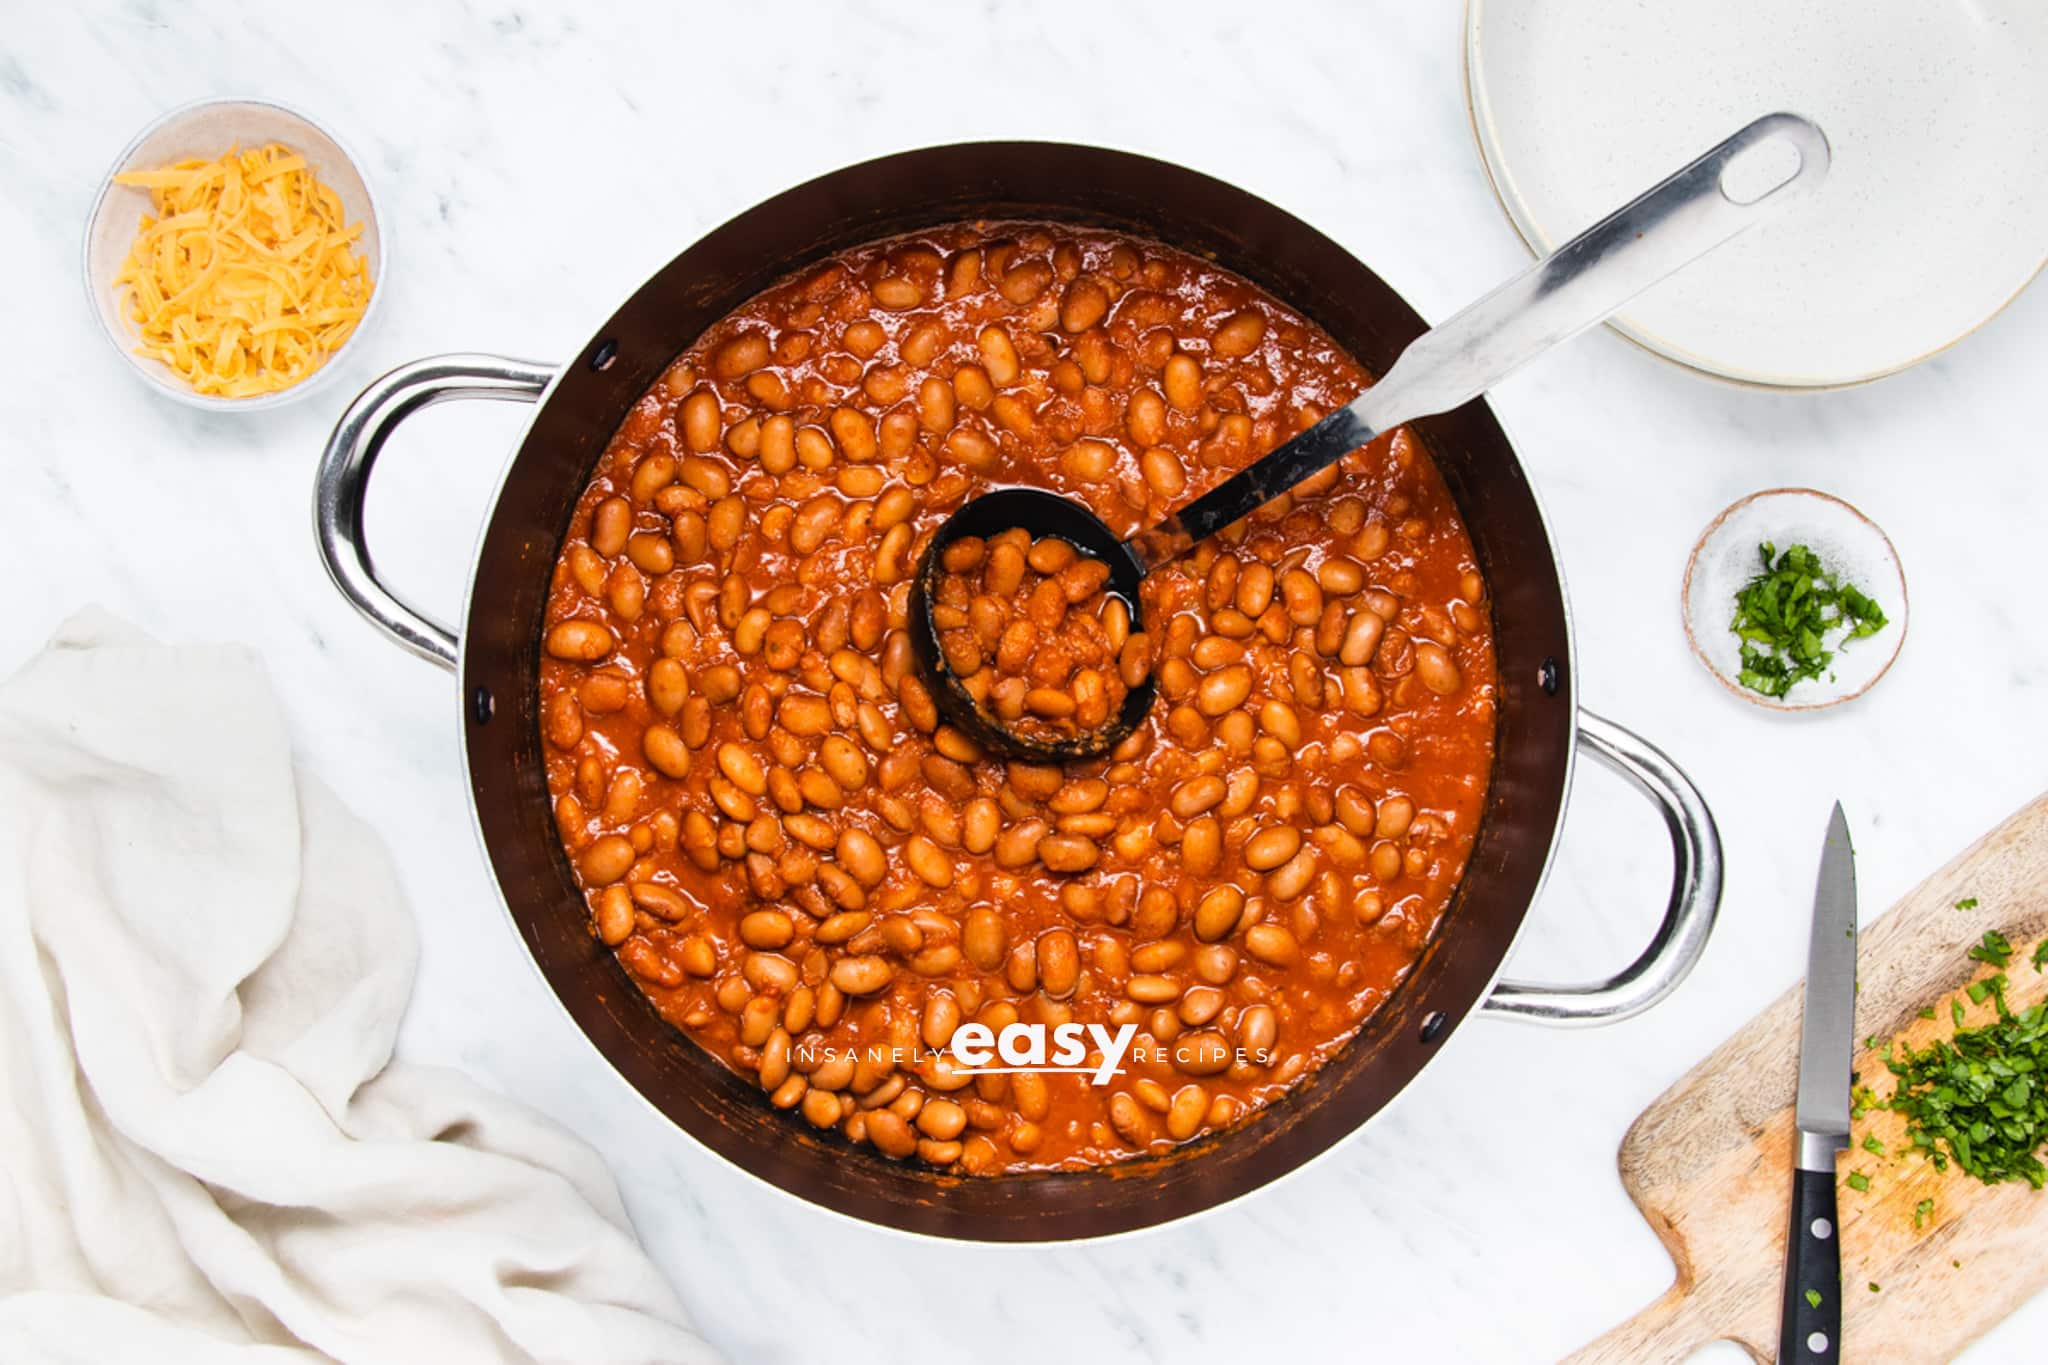 a large pot of beans. A ladle is holding up a serving of ranch beans.